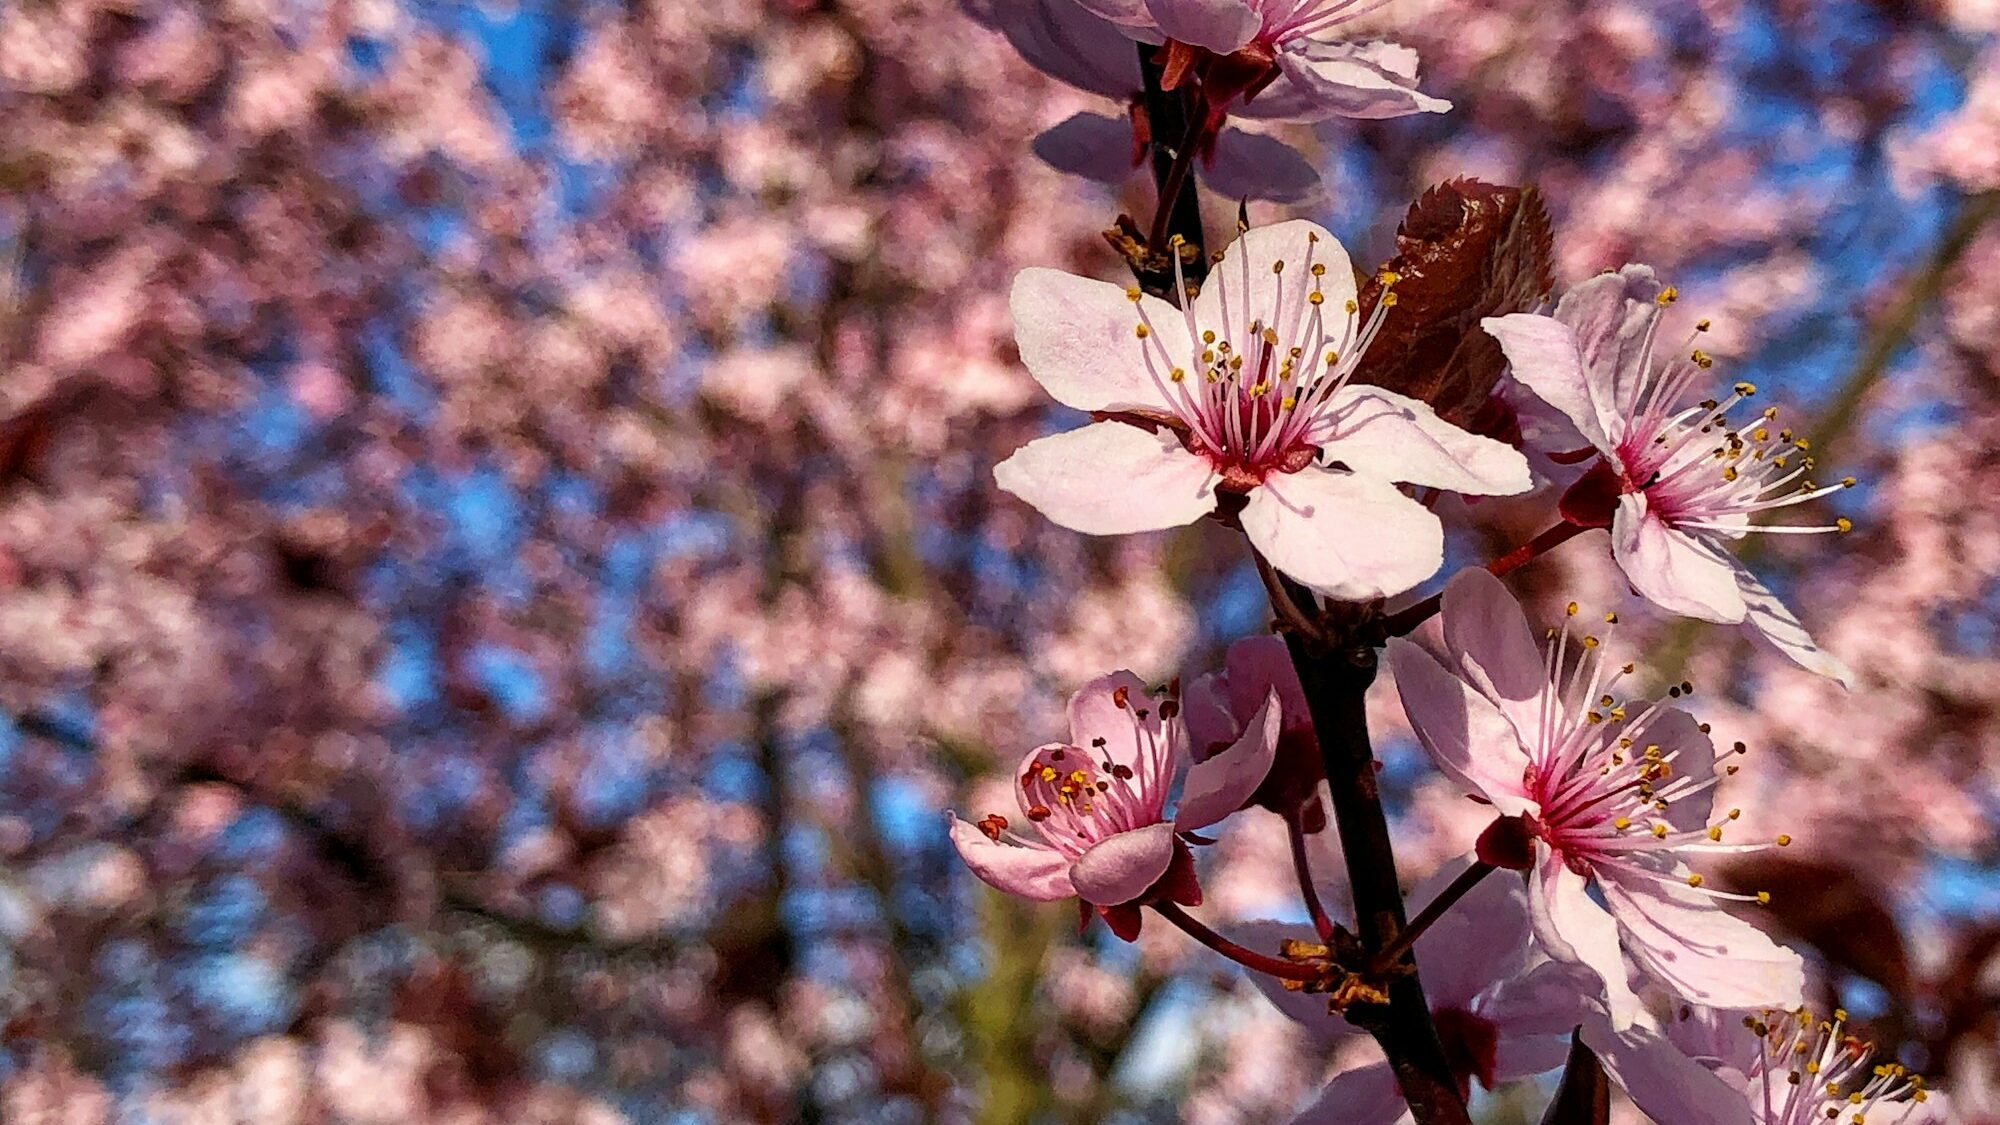 Spring flowers on trees in Boise and Meridian Idaho